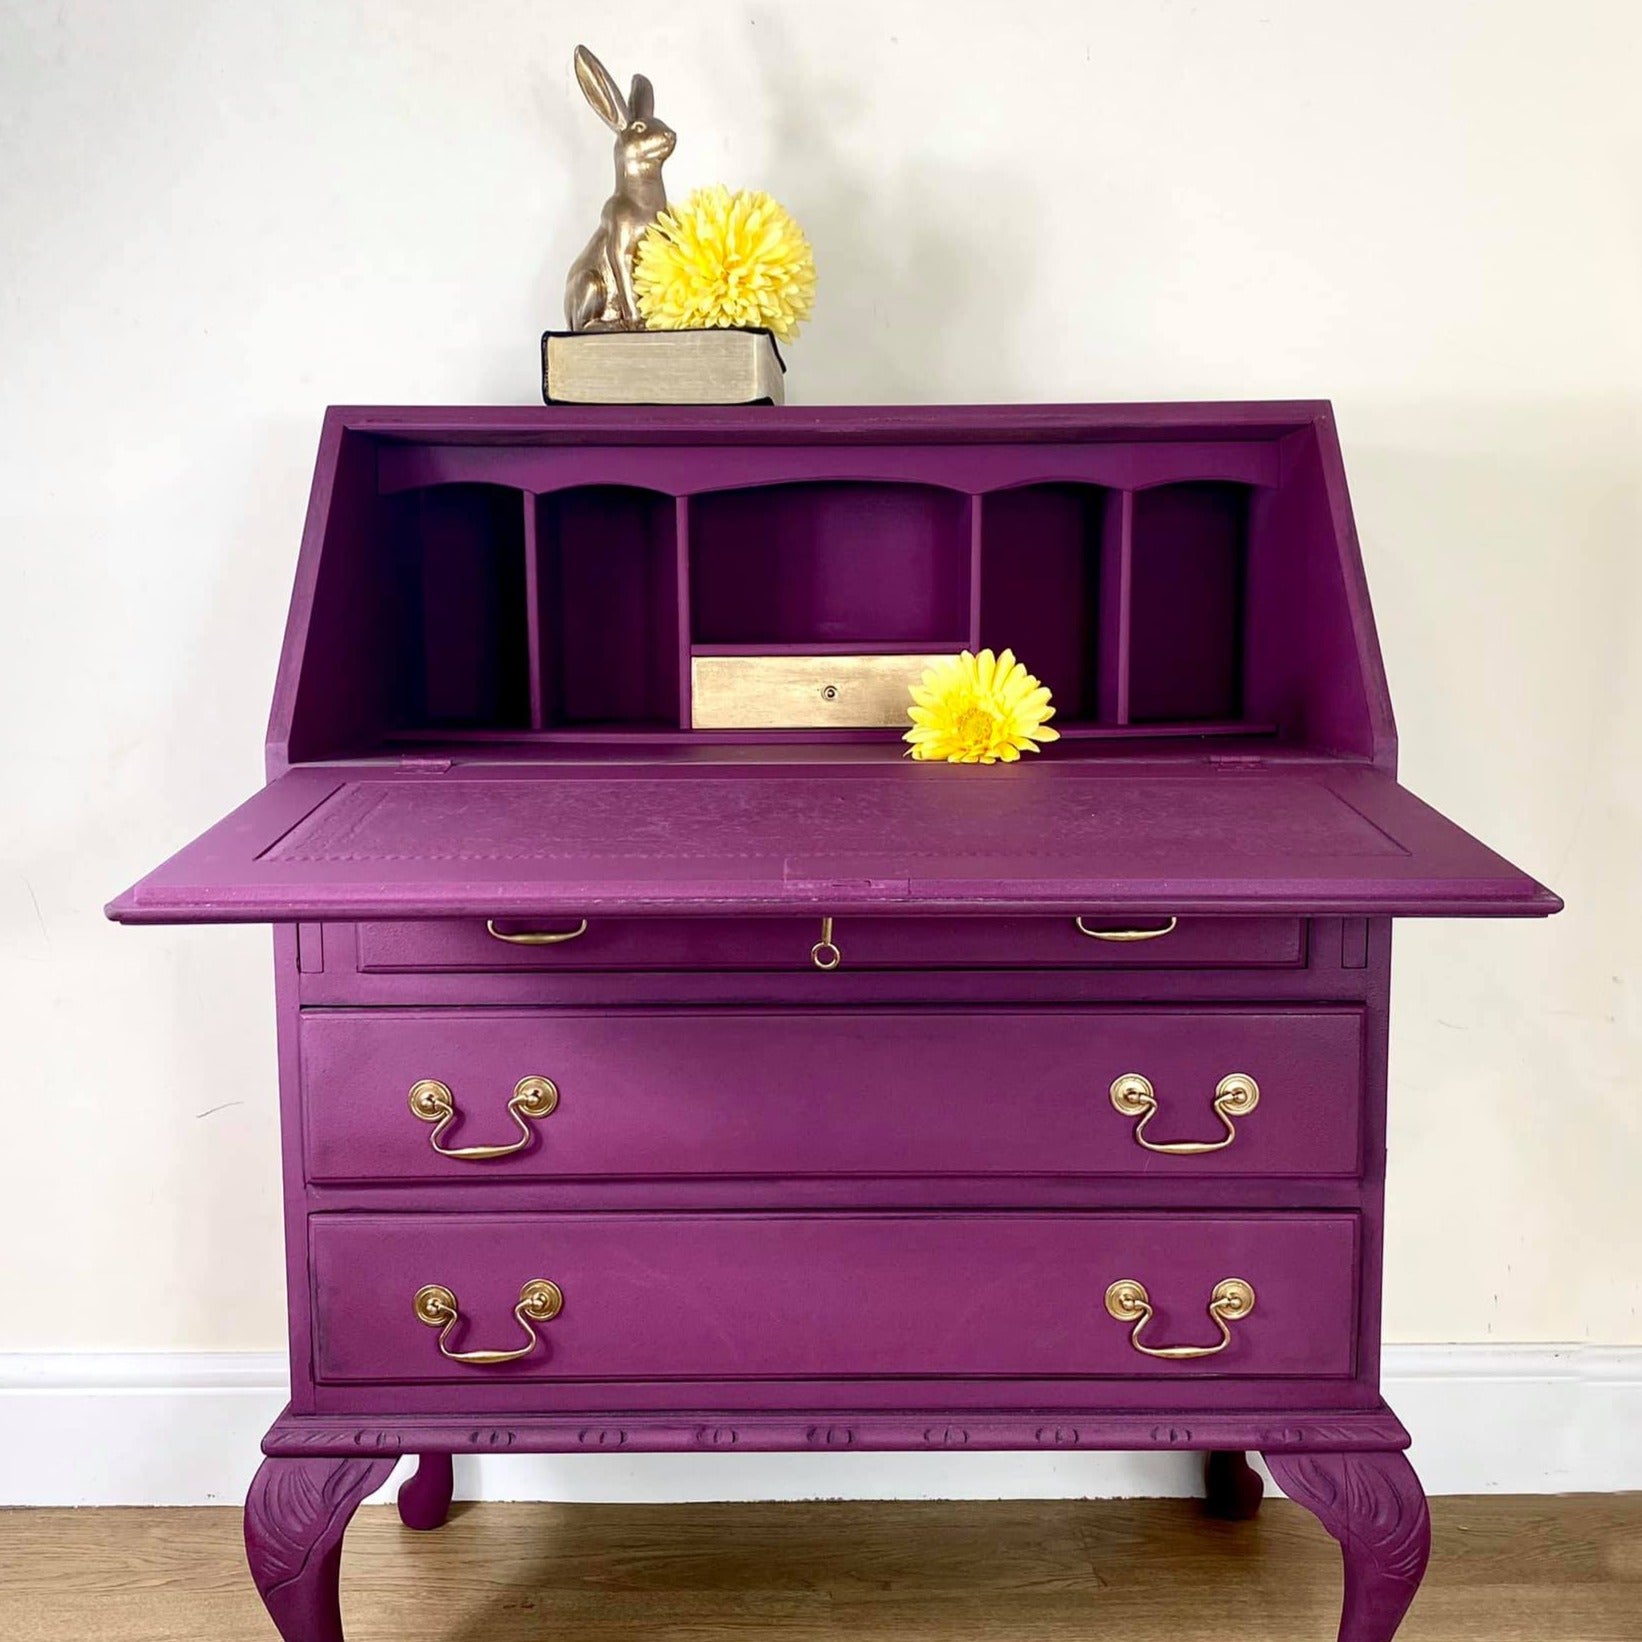 Frenchic Paint | Lazy Range - Plum Pudding by Weirs of Baggot St